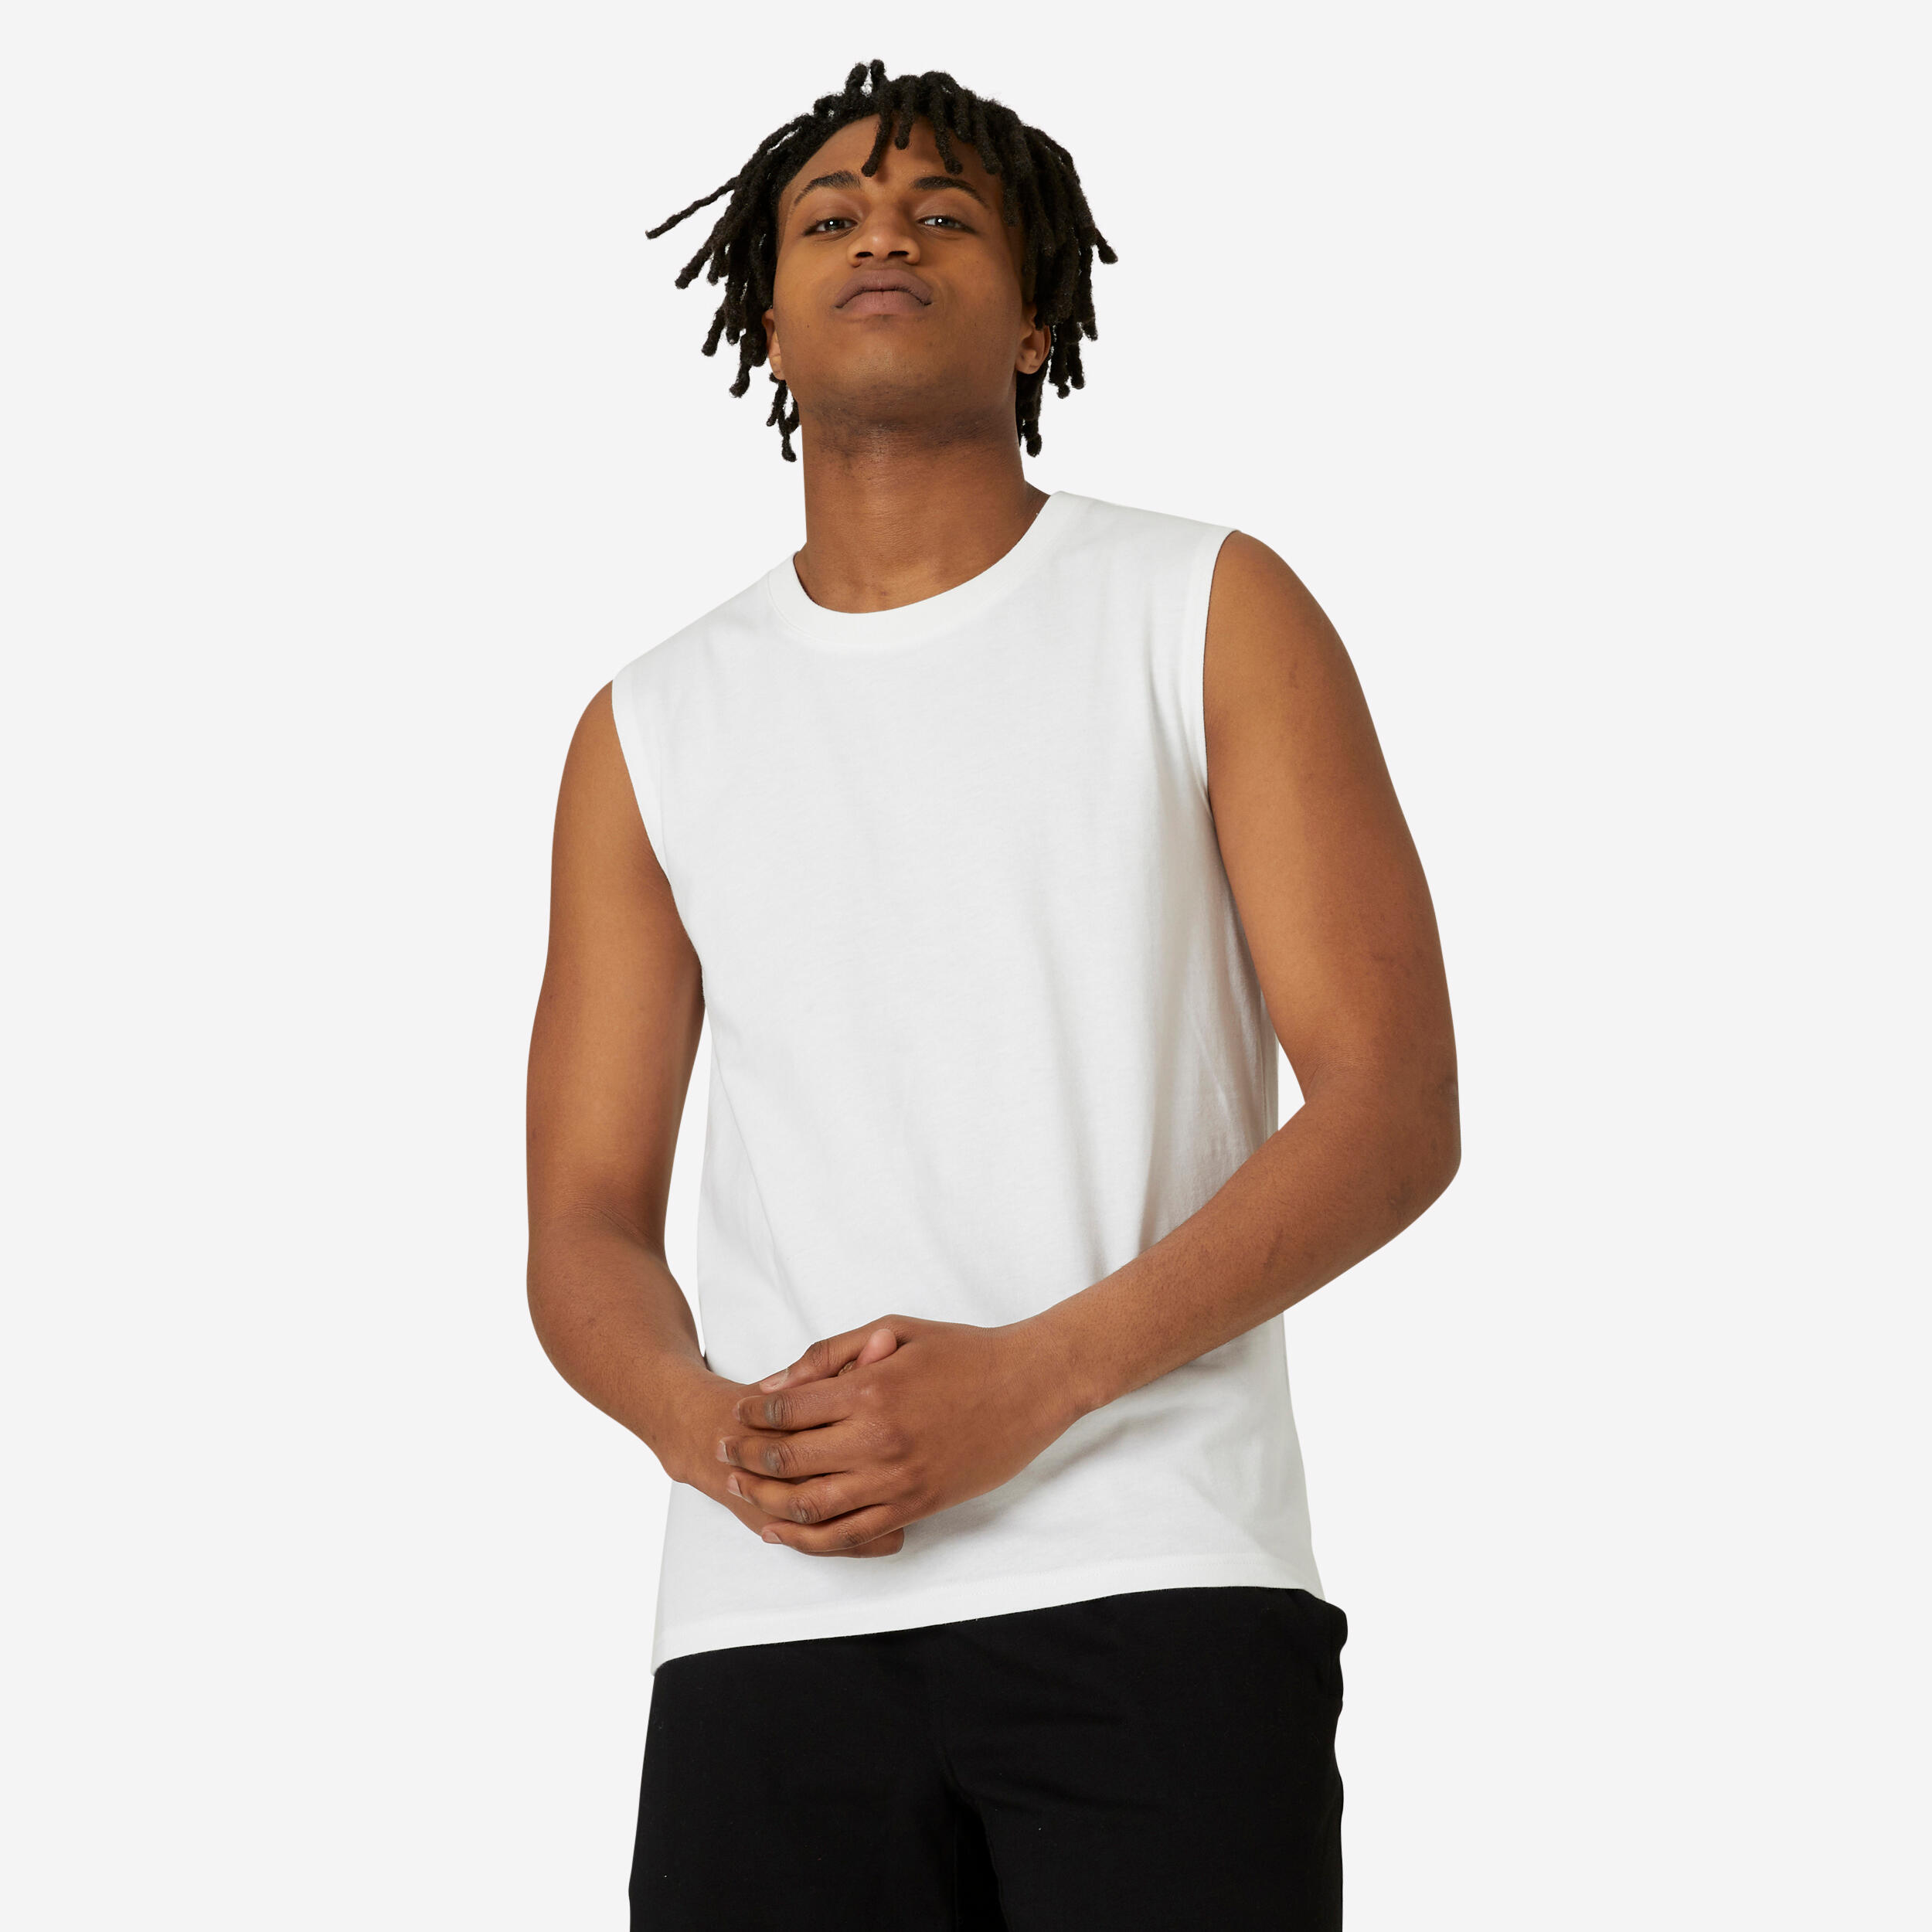 Men's Stretchy Fitness Tank Top 500 - White 1/4